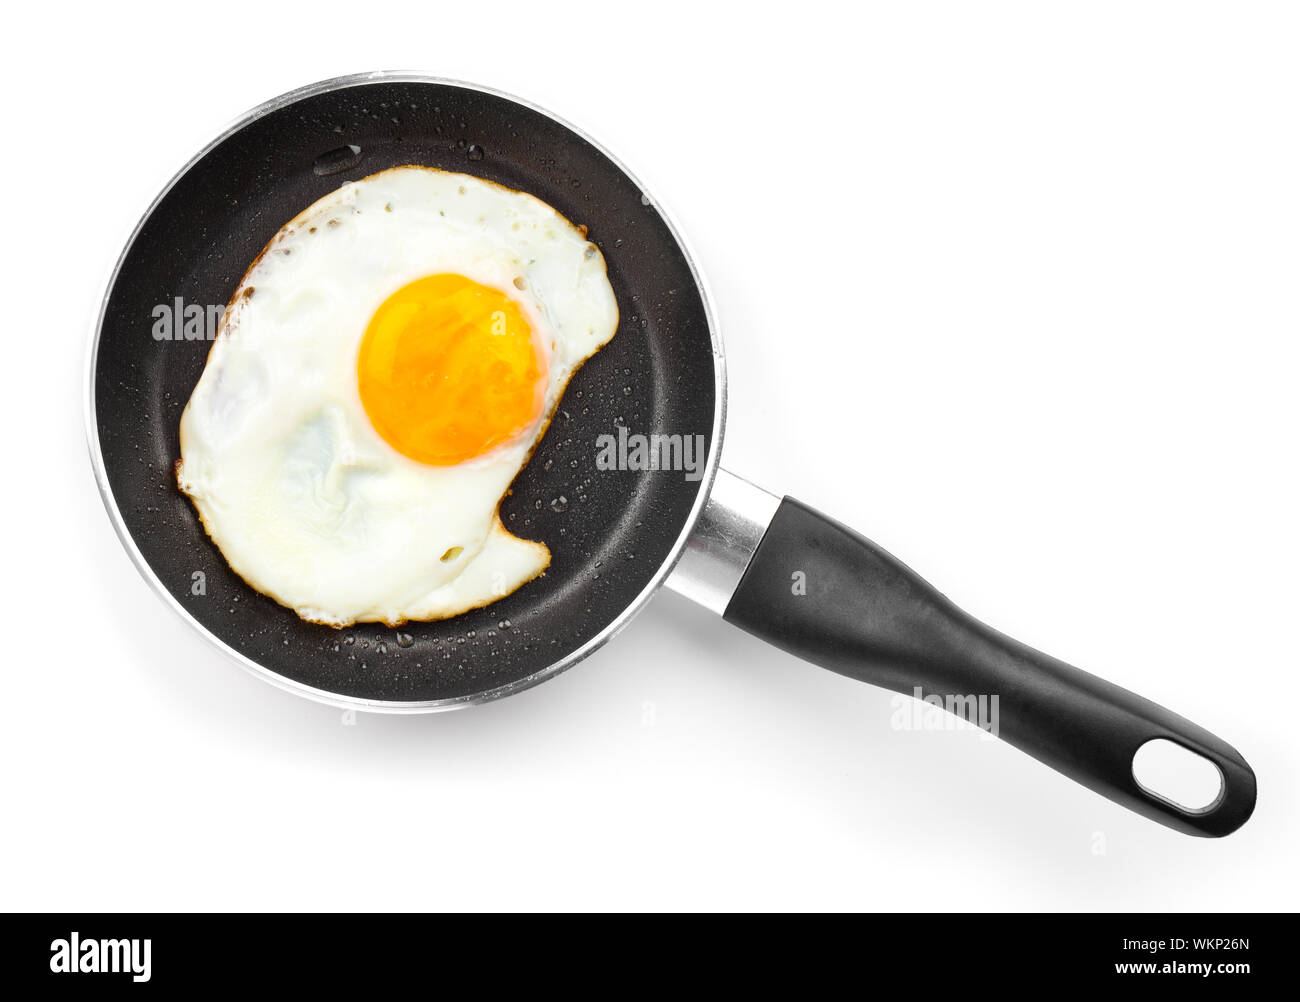 Fried egg in a frying pan, over white background Stock Photo